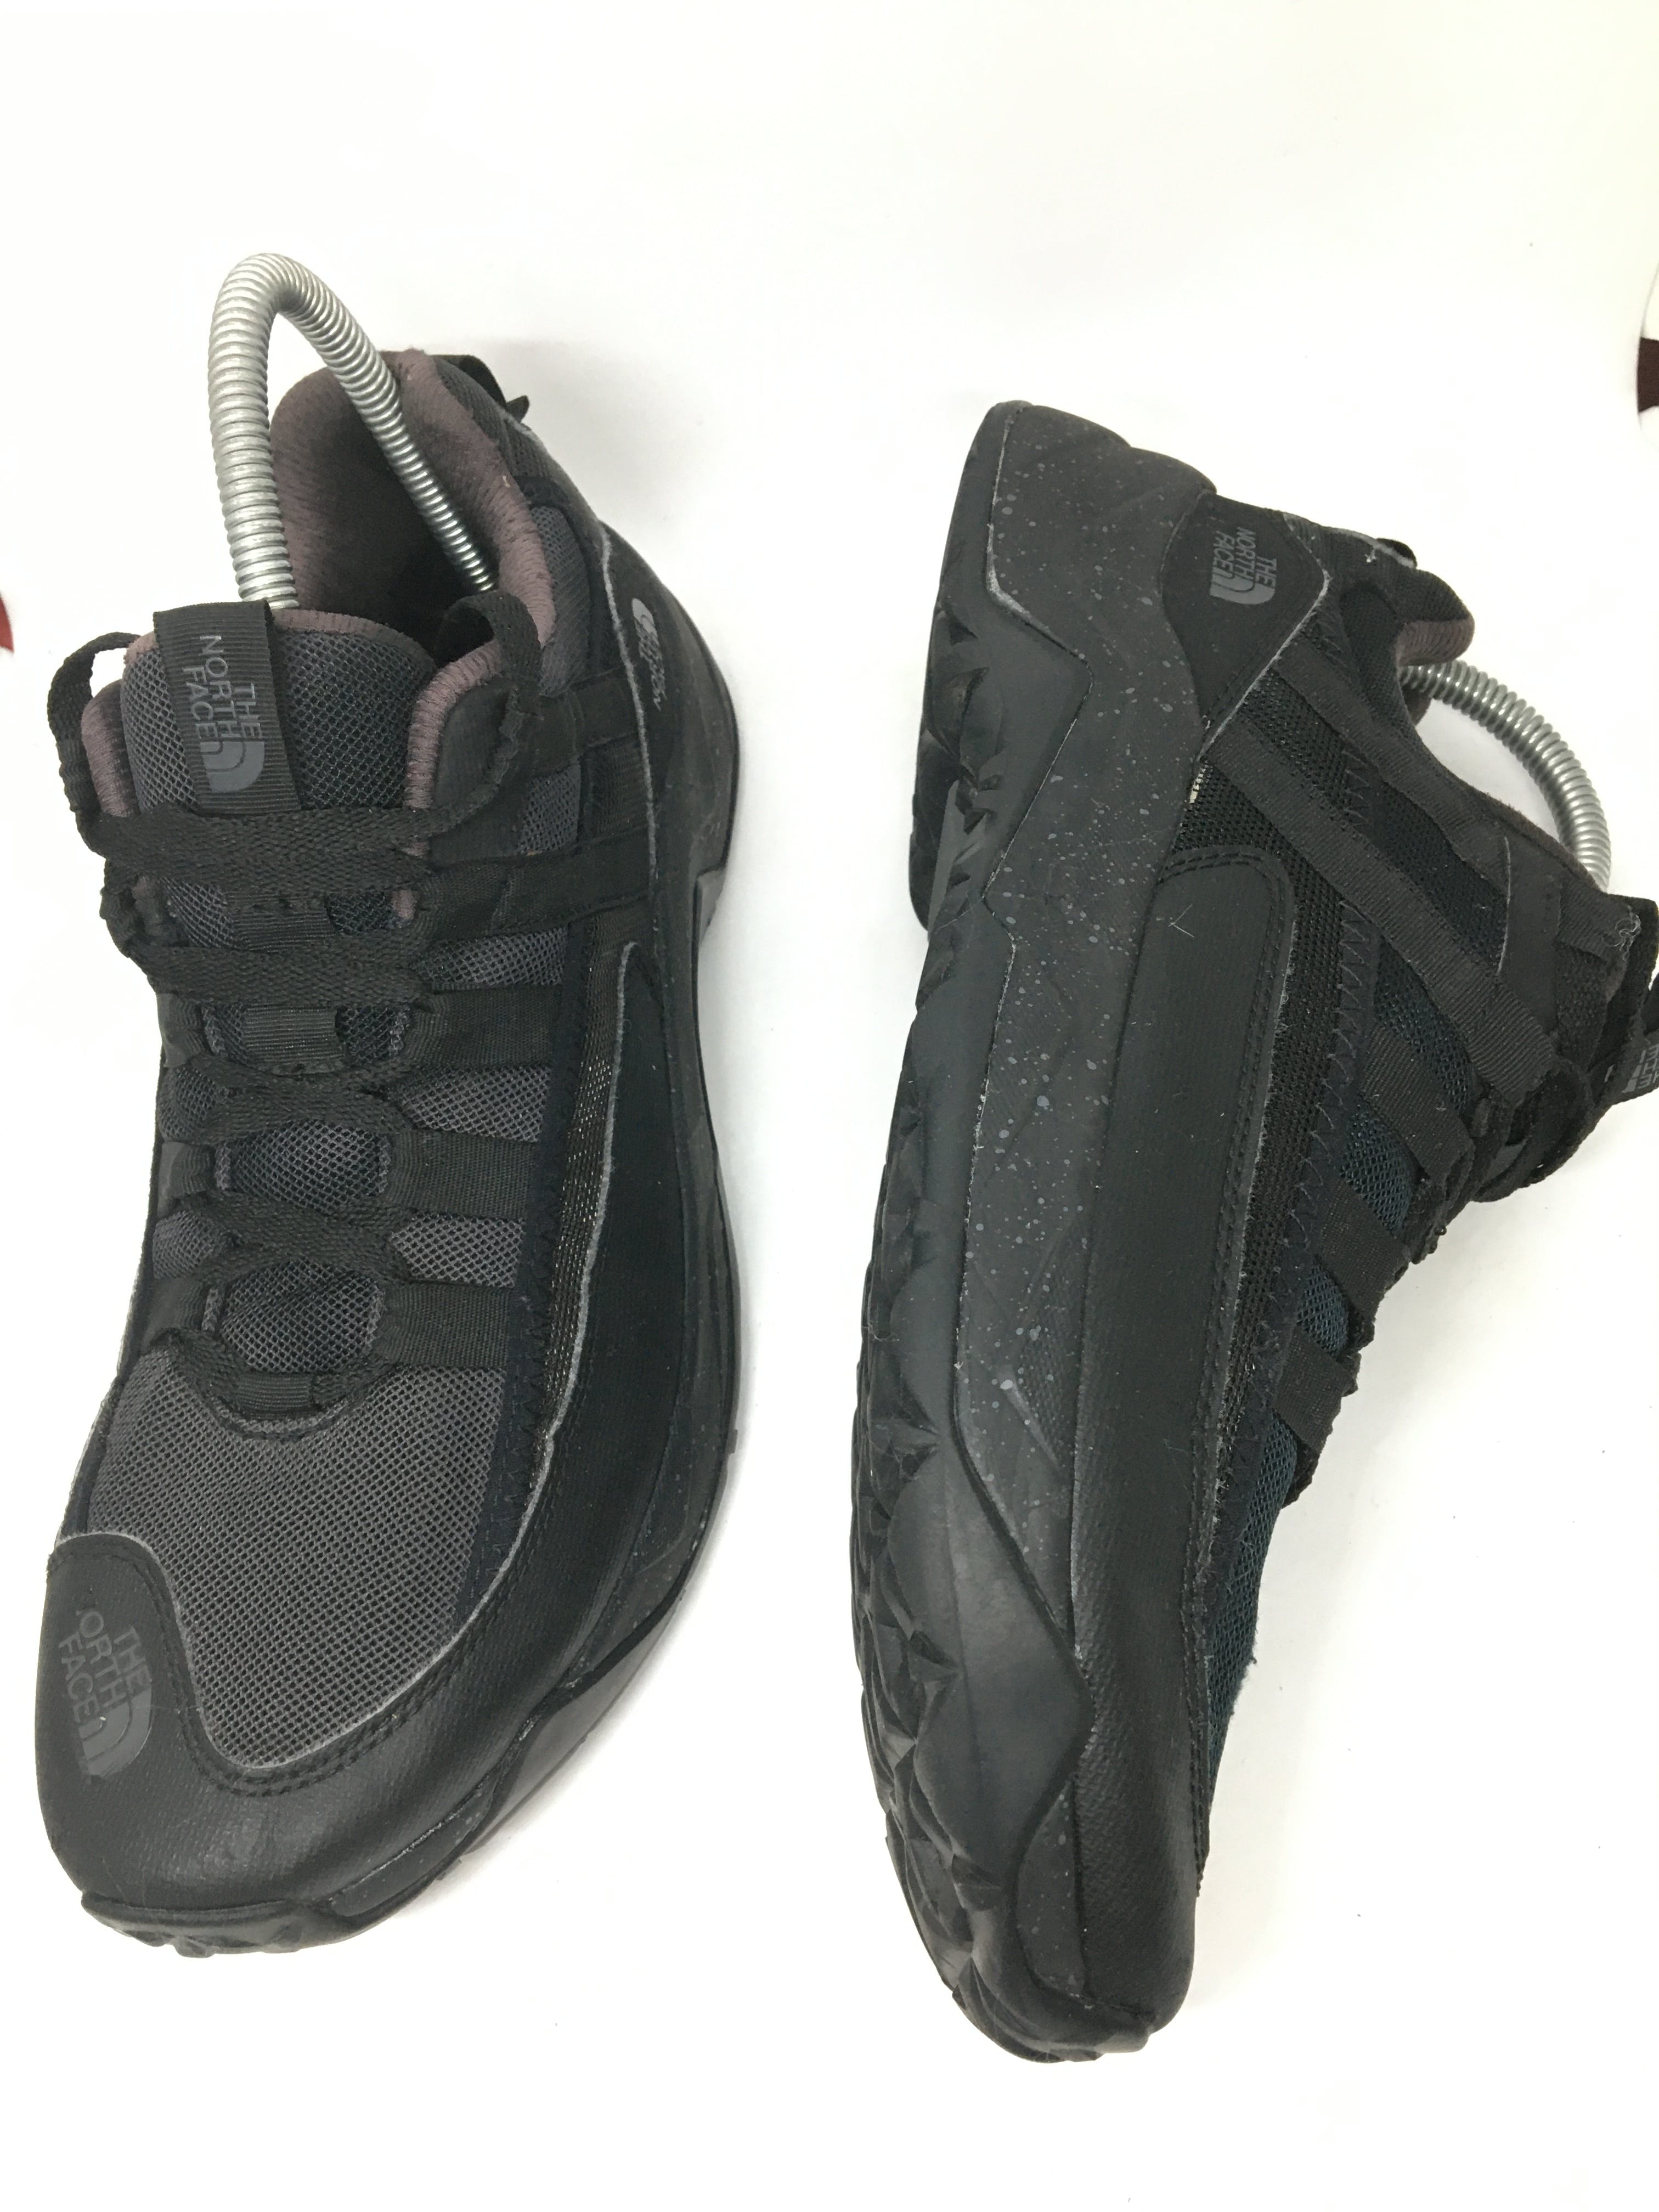 TNF The north face black sneakers size us9 - 3